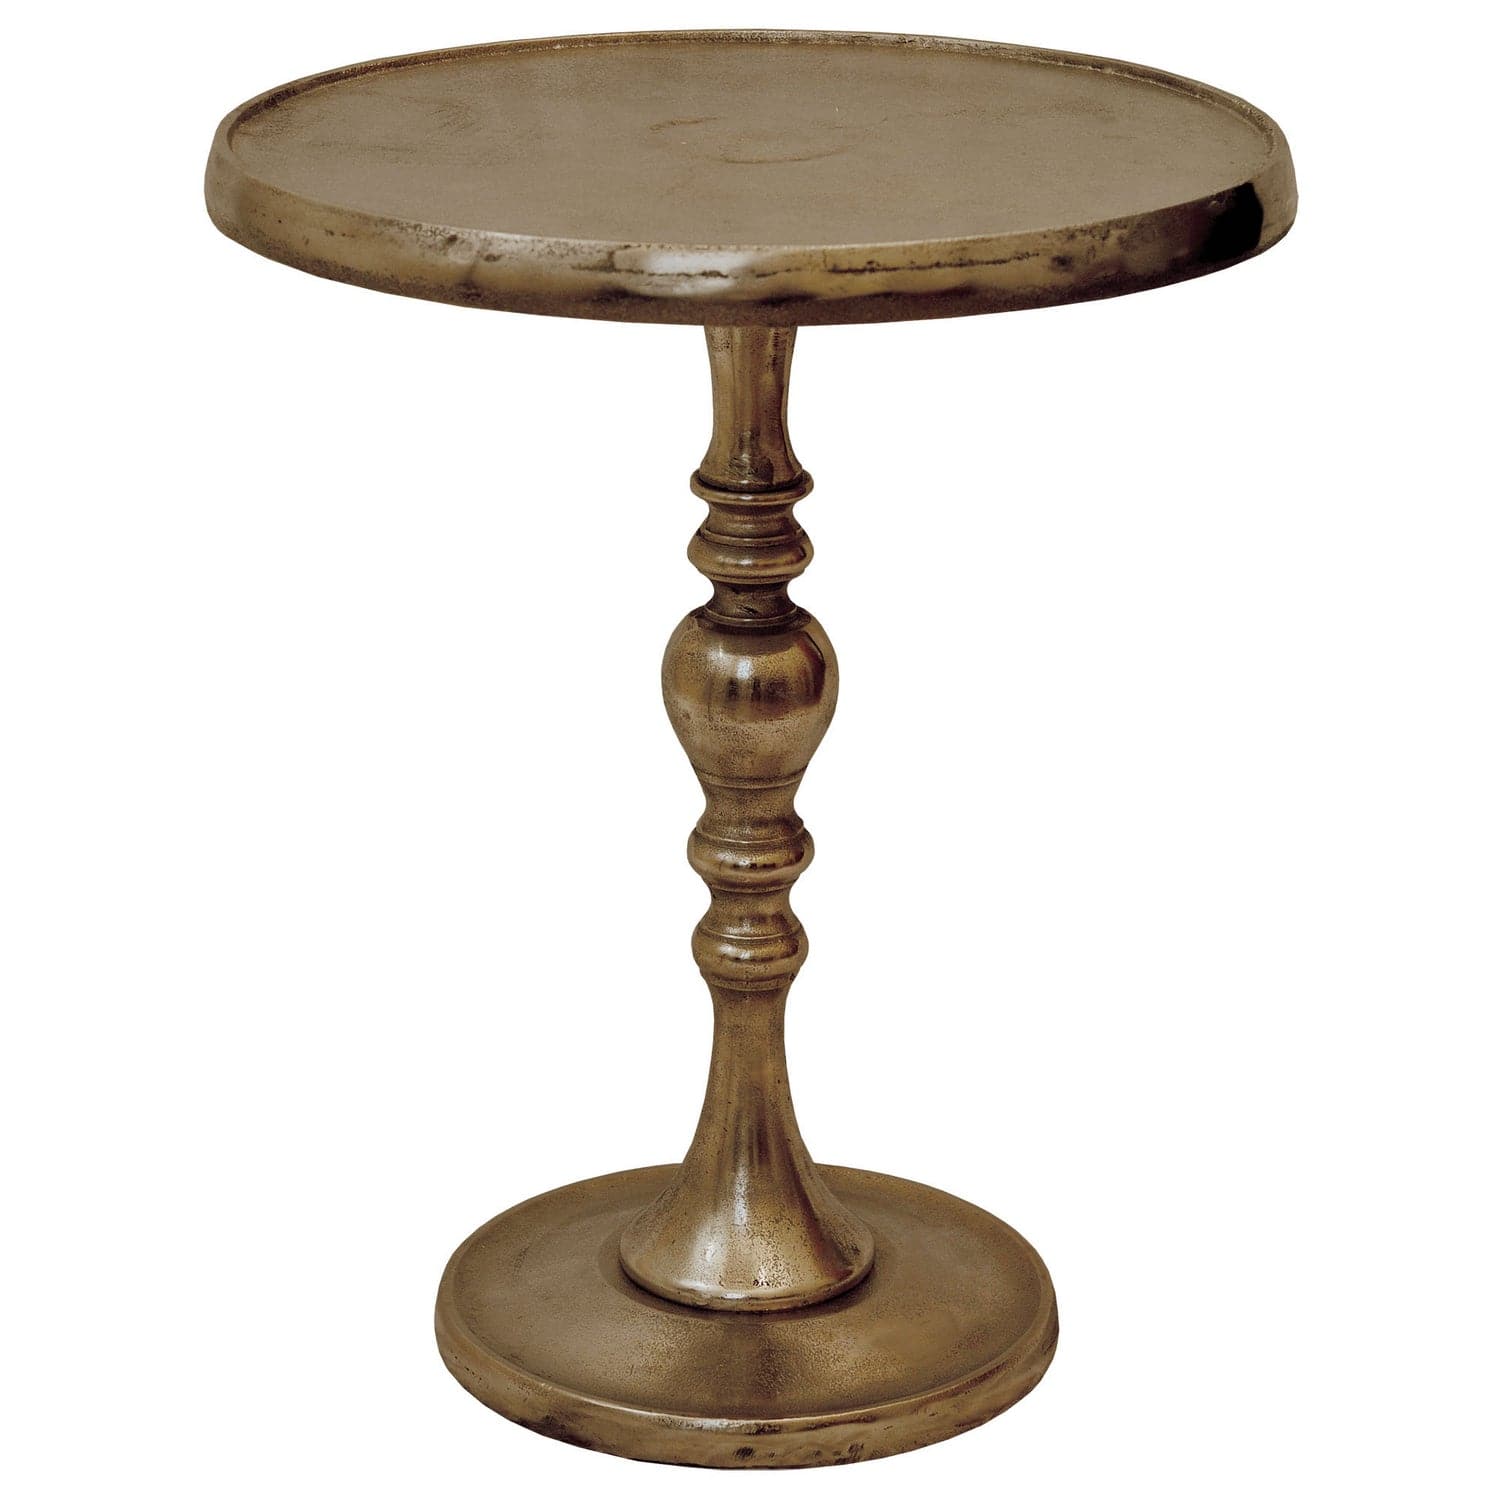 Renwil - TA033 - Accent Table - Romina Brass - Antiqued Brass